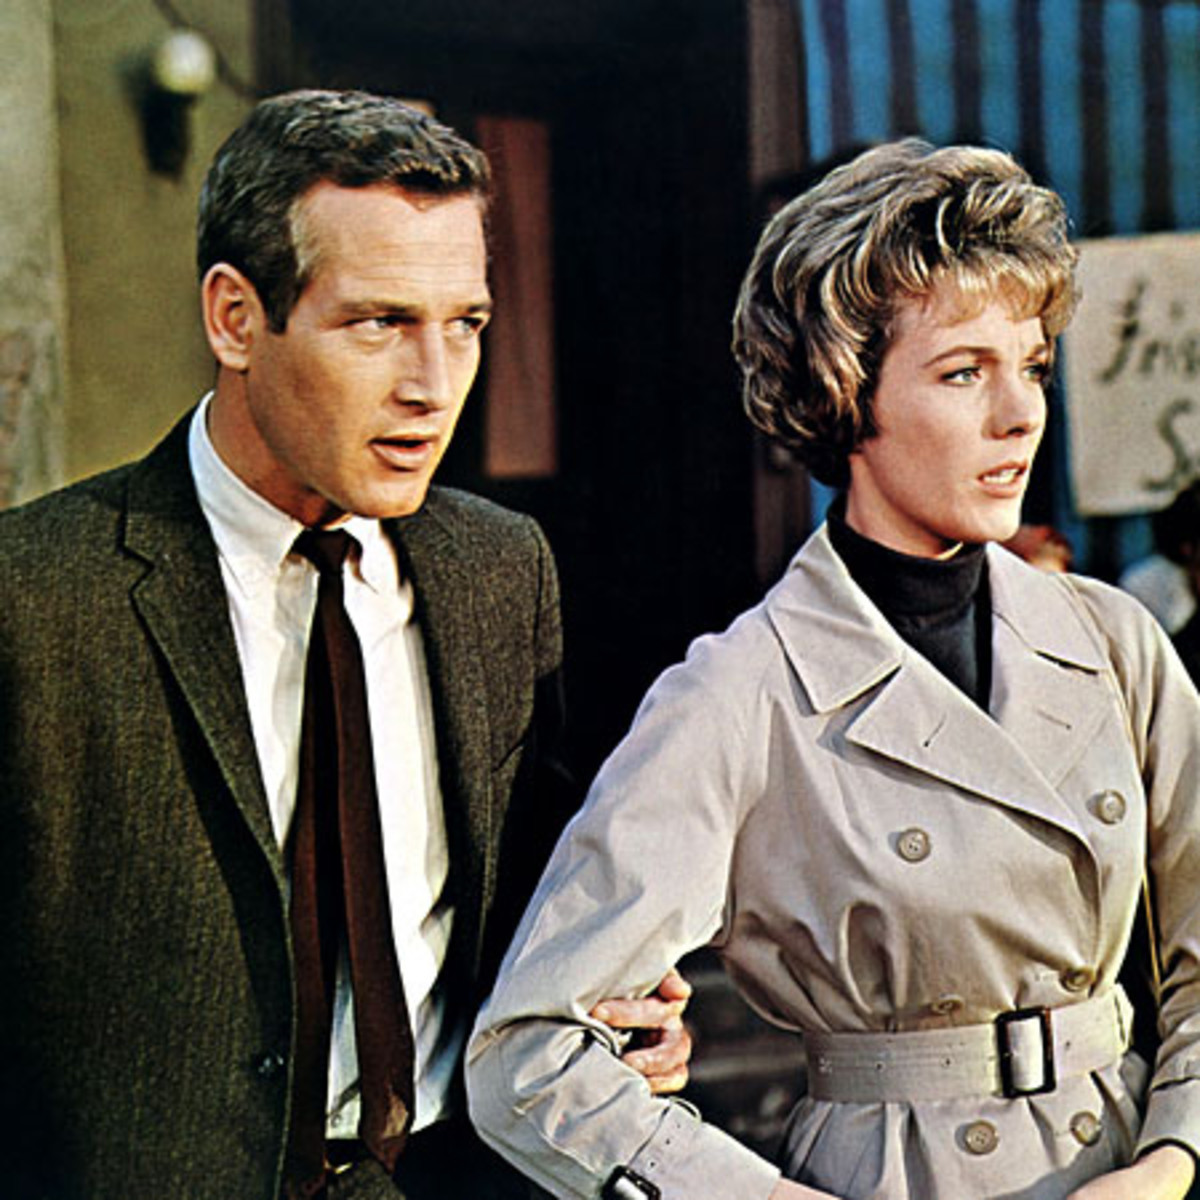 Paul Newman as the professor with a secret mission, and Julie Andrews as the fiancée with a big dilemma - to stay with him in Eastern Europe, or to be loyal to her country